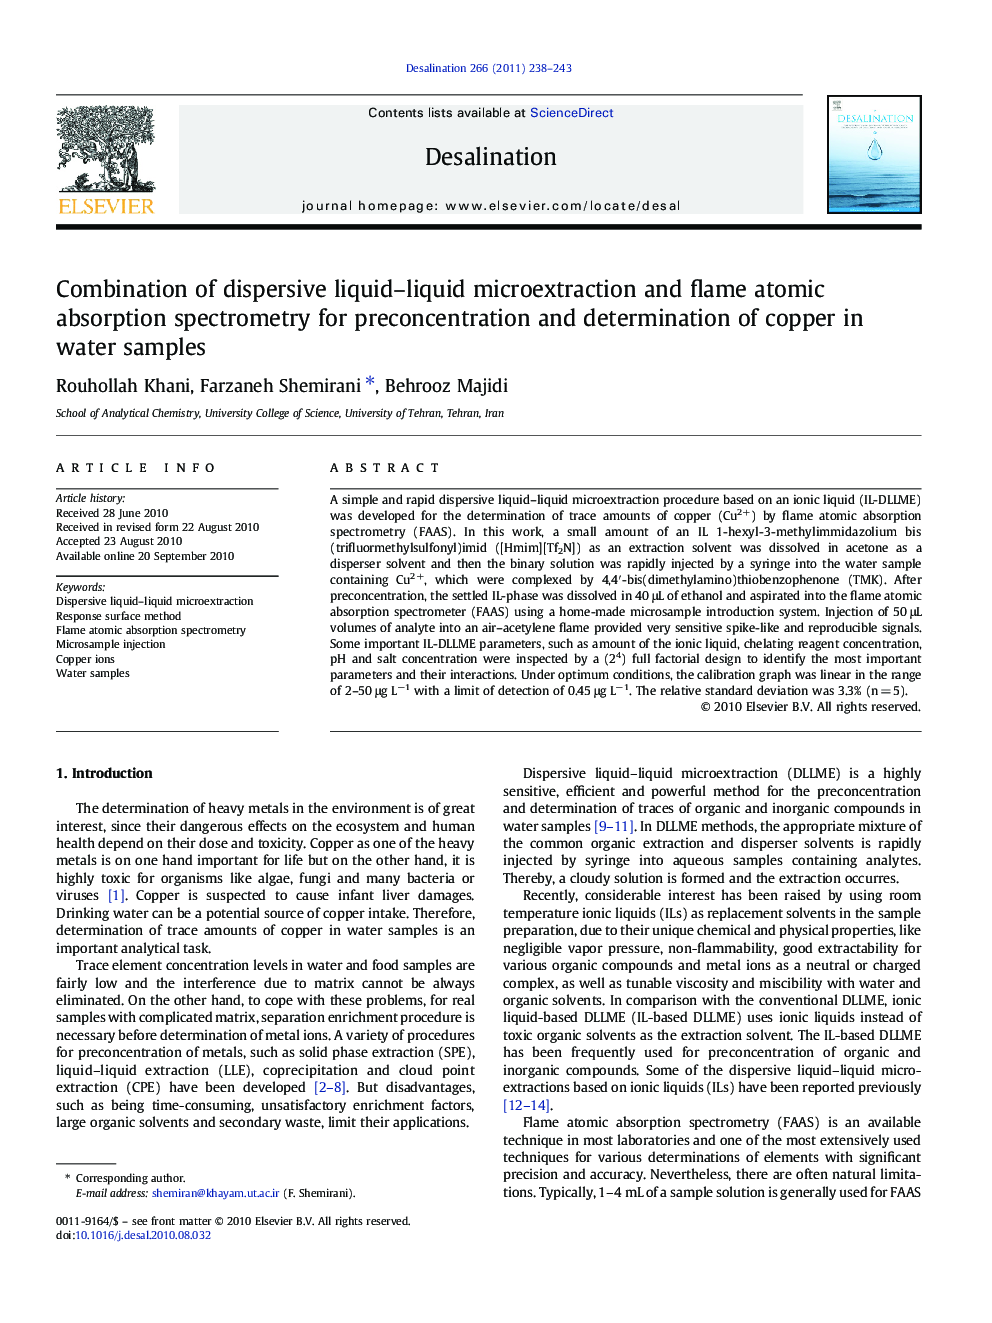 Combination of dispersive liquid–liquid microextraction and flame atomic absorption spectrometry for preconcentration and determination of copper in water samples